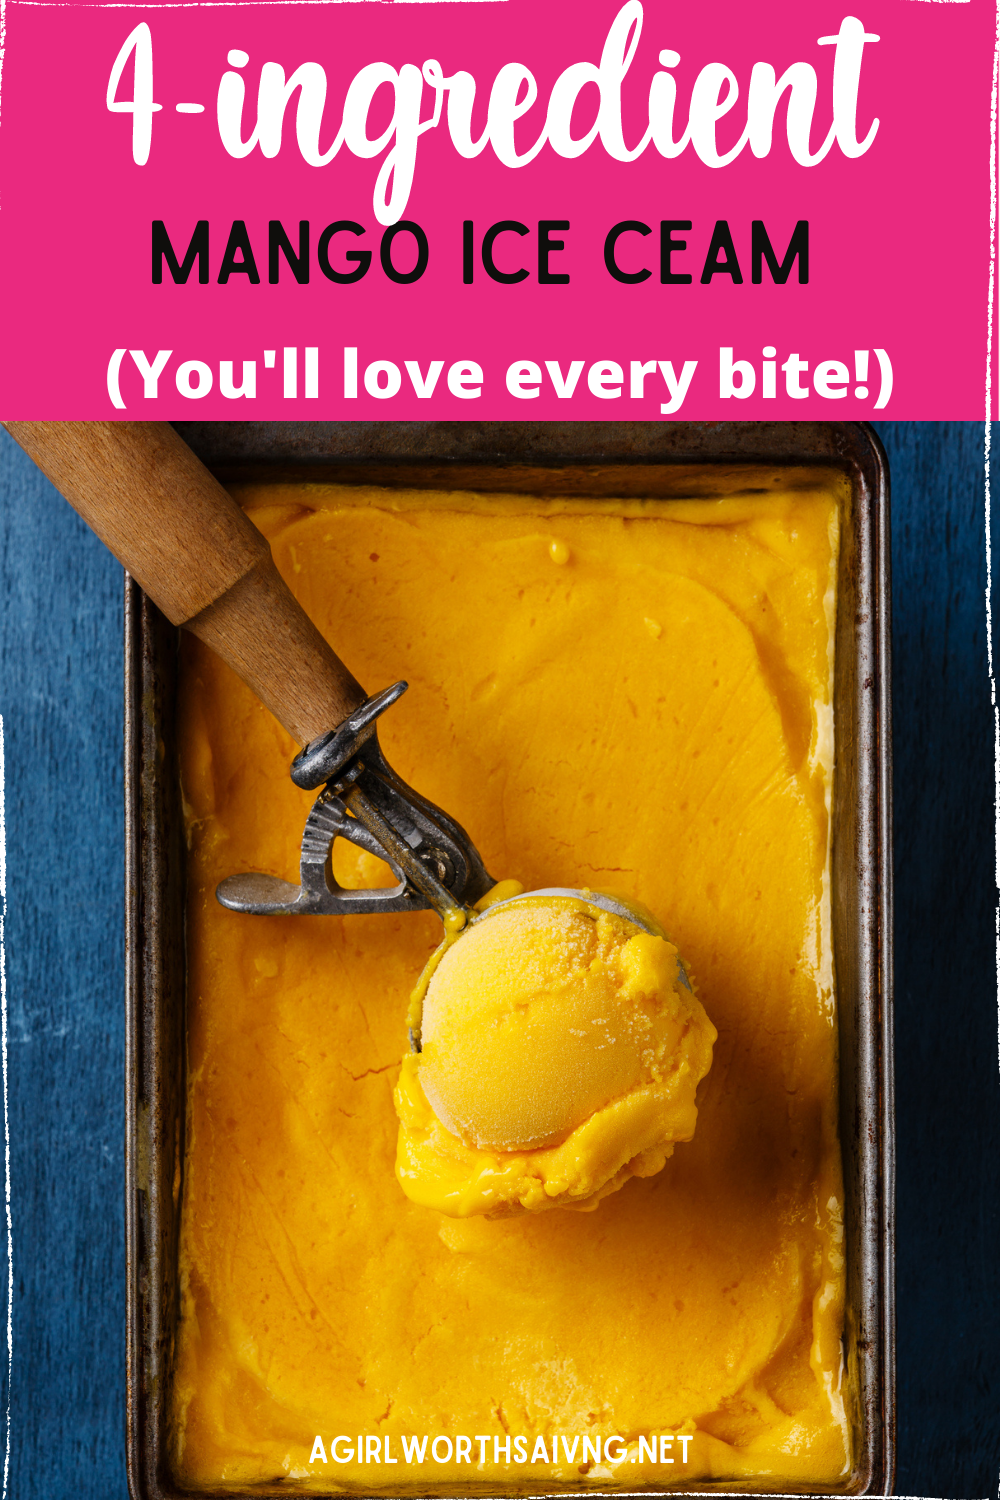 Mango ice cream is a delicious summer treat. However, most store-bought mango ice creams are filled with artificial flavors and preservatives. Homemade mango ice cream is much healthier and can be just as creamy and delicious as store-bought stuff. Making your own mango ice cream at home also means you can control the amount of sugar and other ingredients that go into it. Here is an easy, quick recipe for making homemade mango ice cream from scratch at home, followed by some variations to try out.